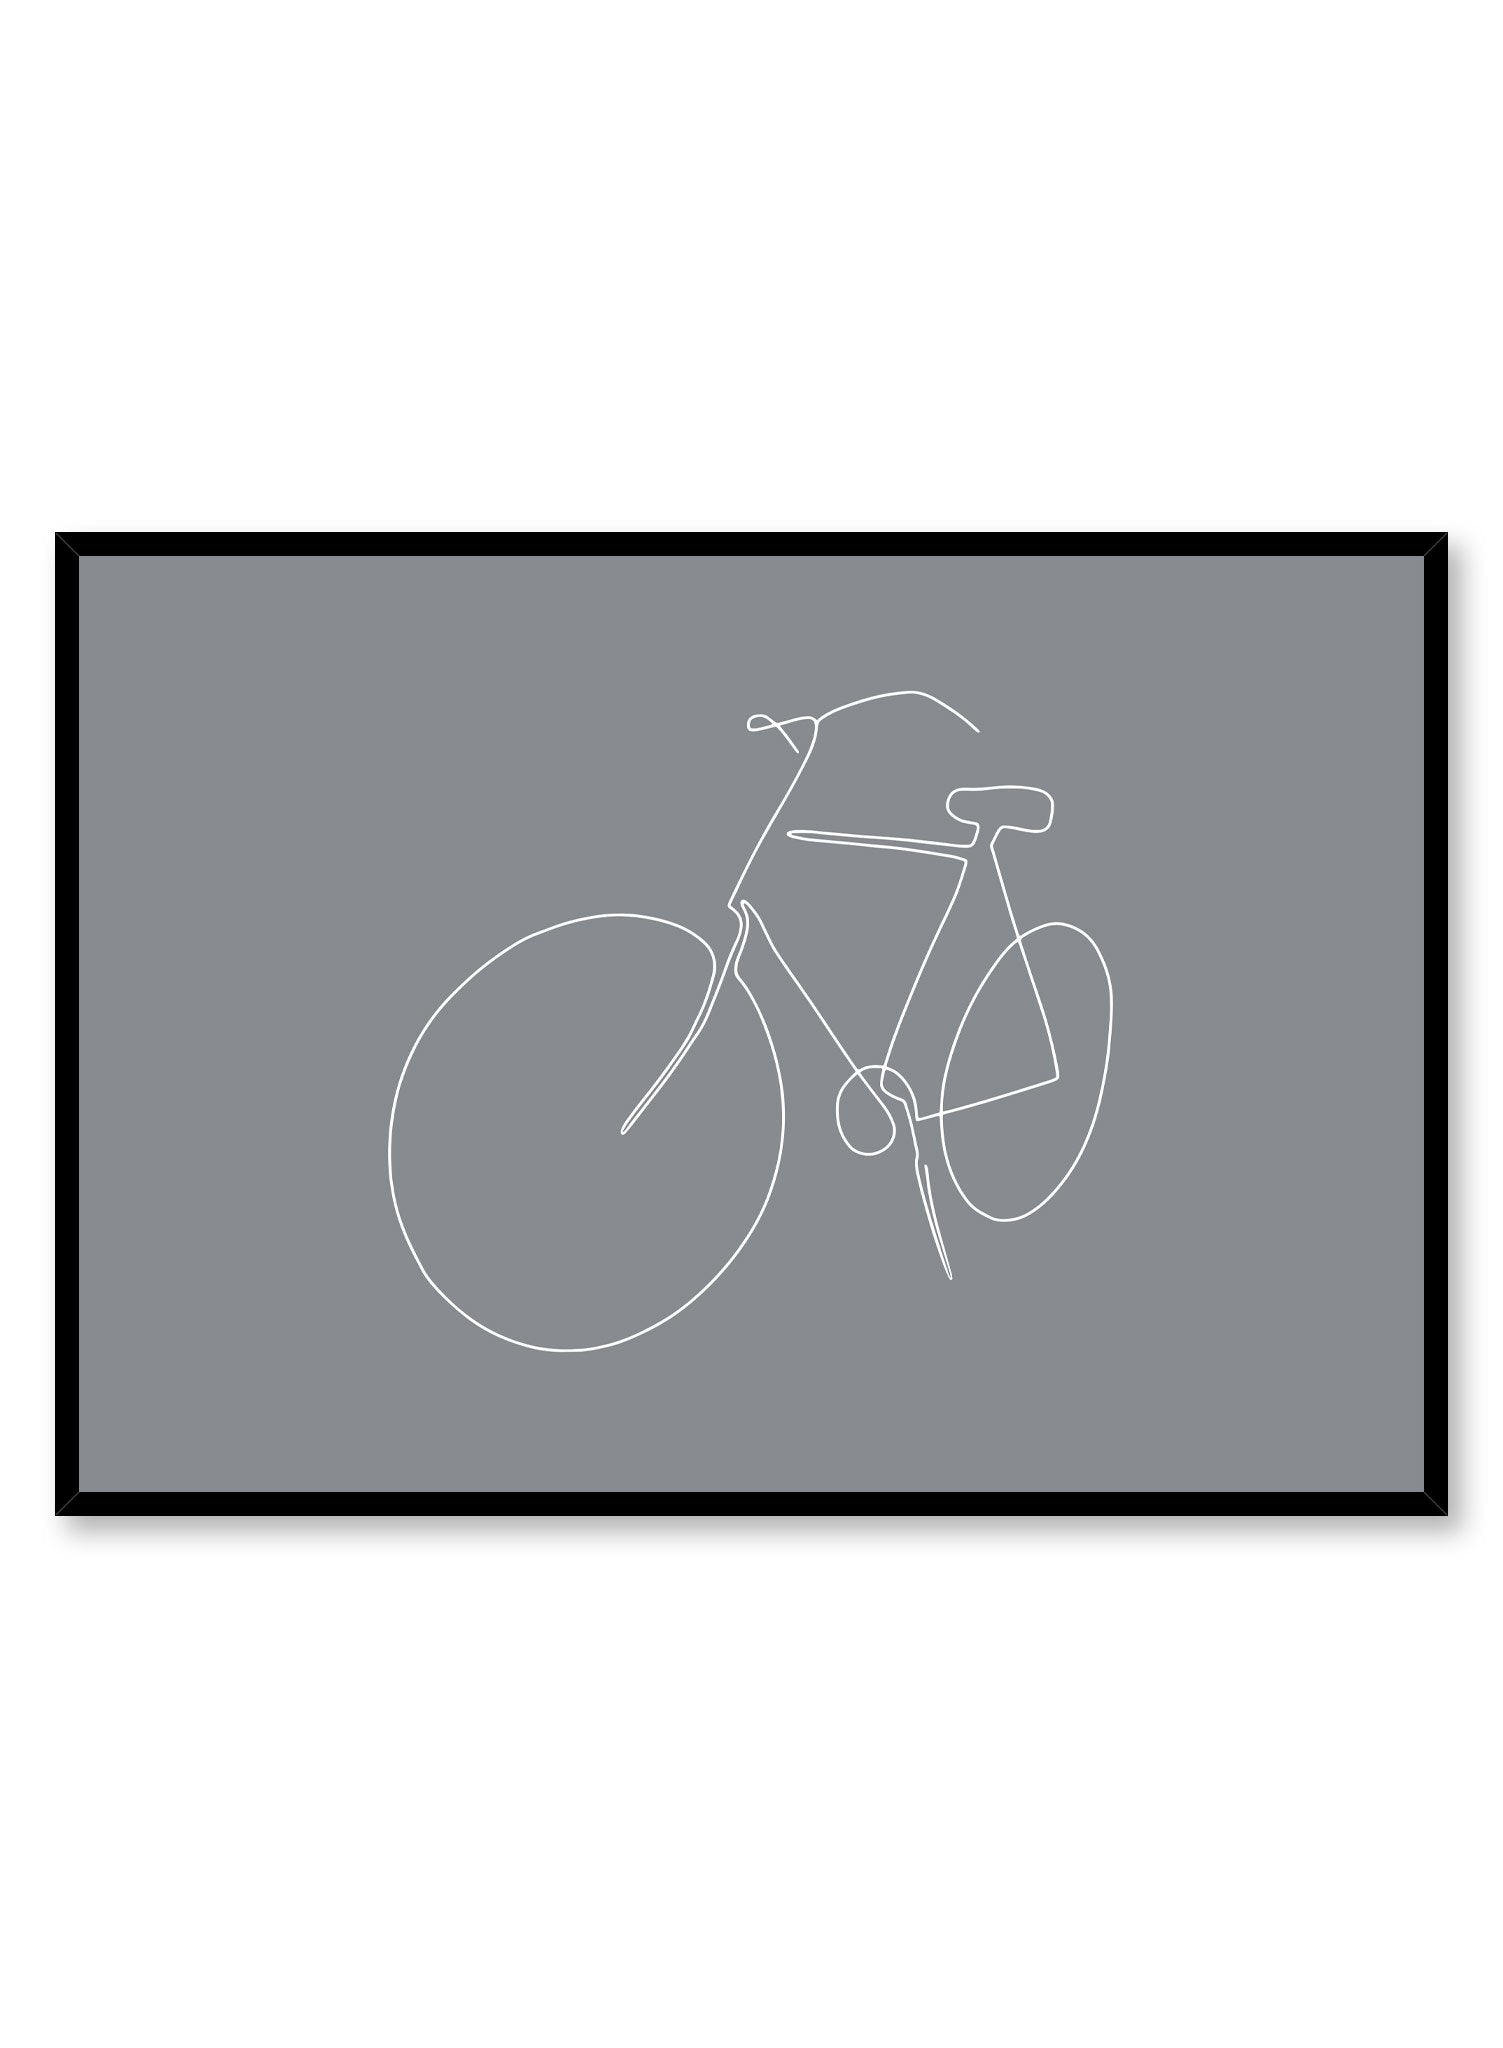 Modern minimalist poster by Opposite Wall with abstract illustration of Fresh Start with gray blue bacKground